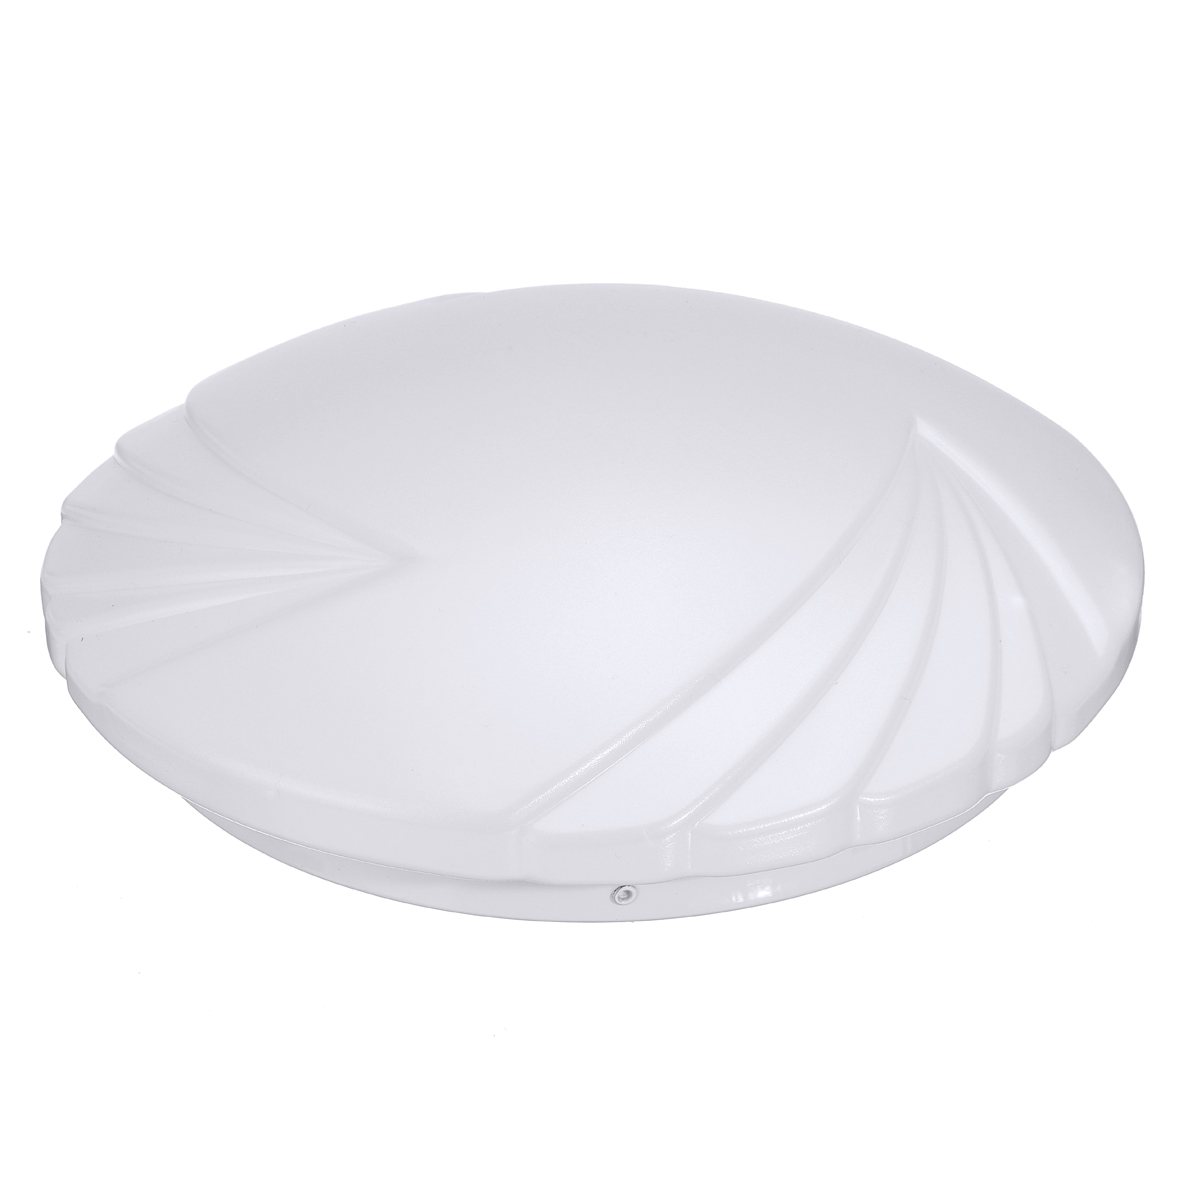 85-265V-14quot-30W-LED-Ceiling-Light-Ultra-Thin-Flush-Mount-Round-Home-Fixture-Lamp-1698280-11